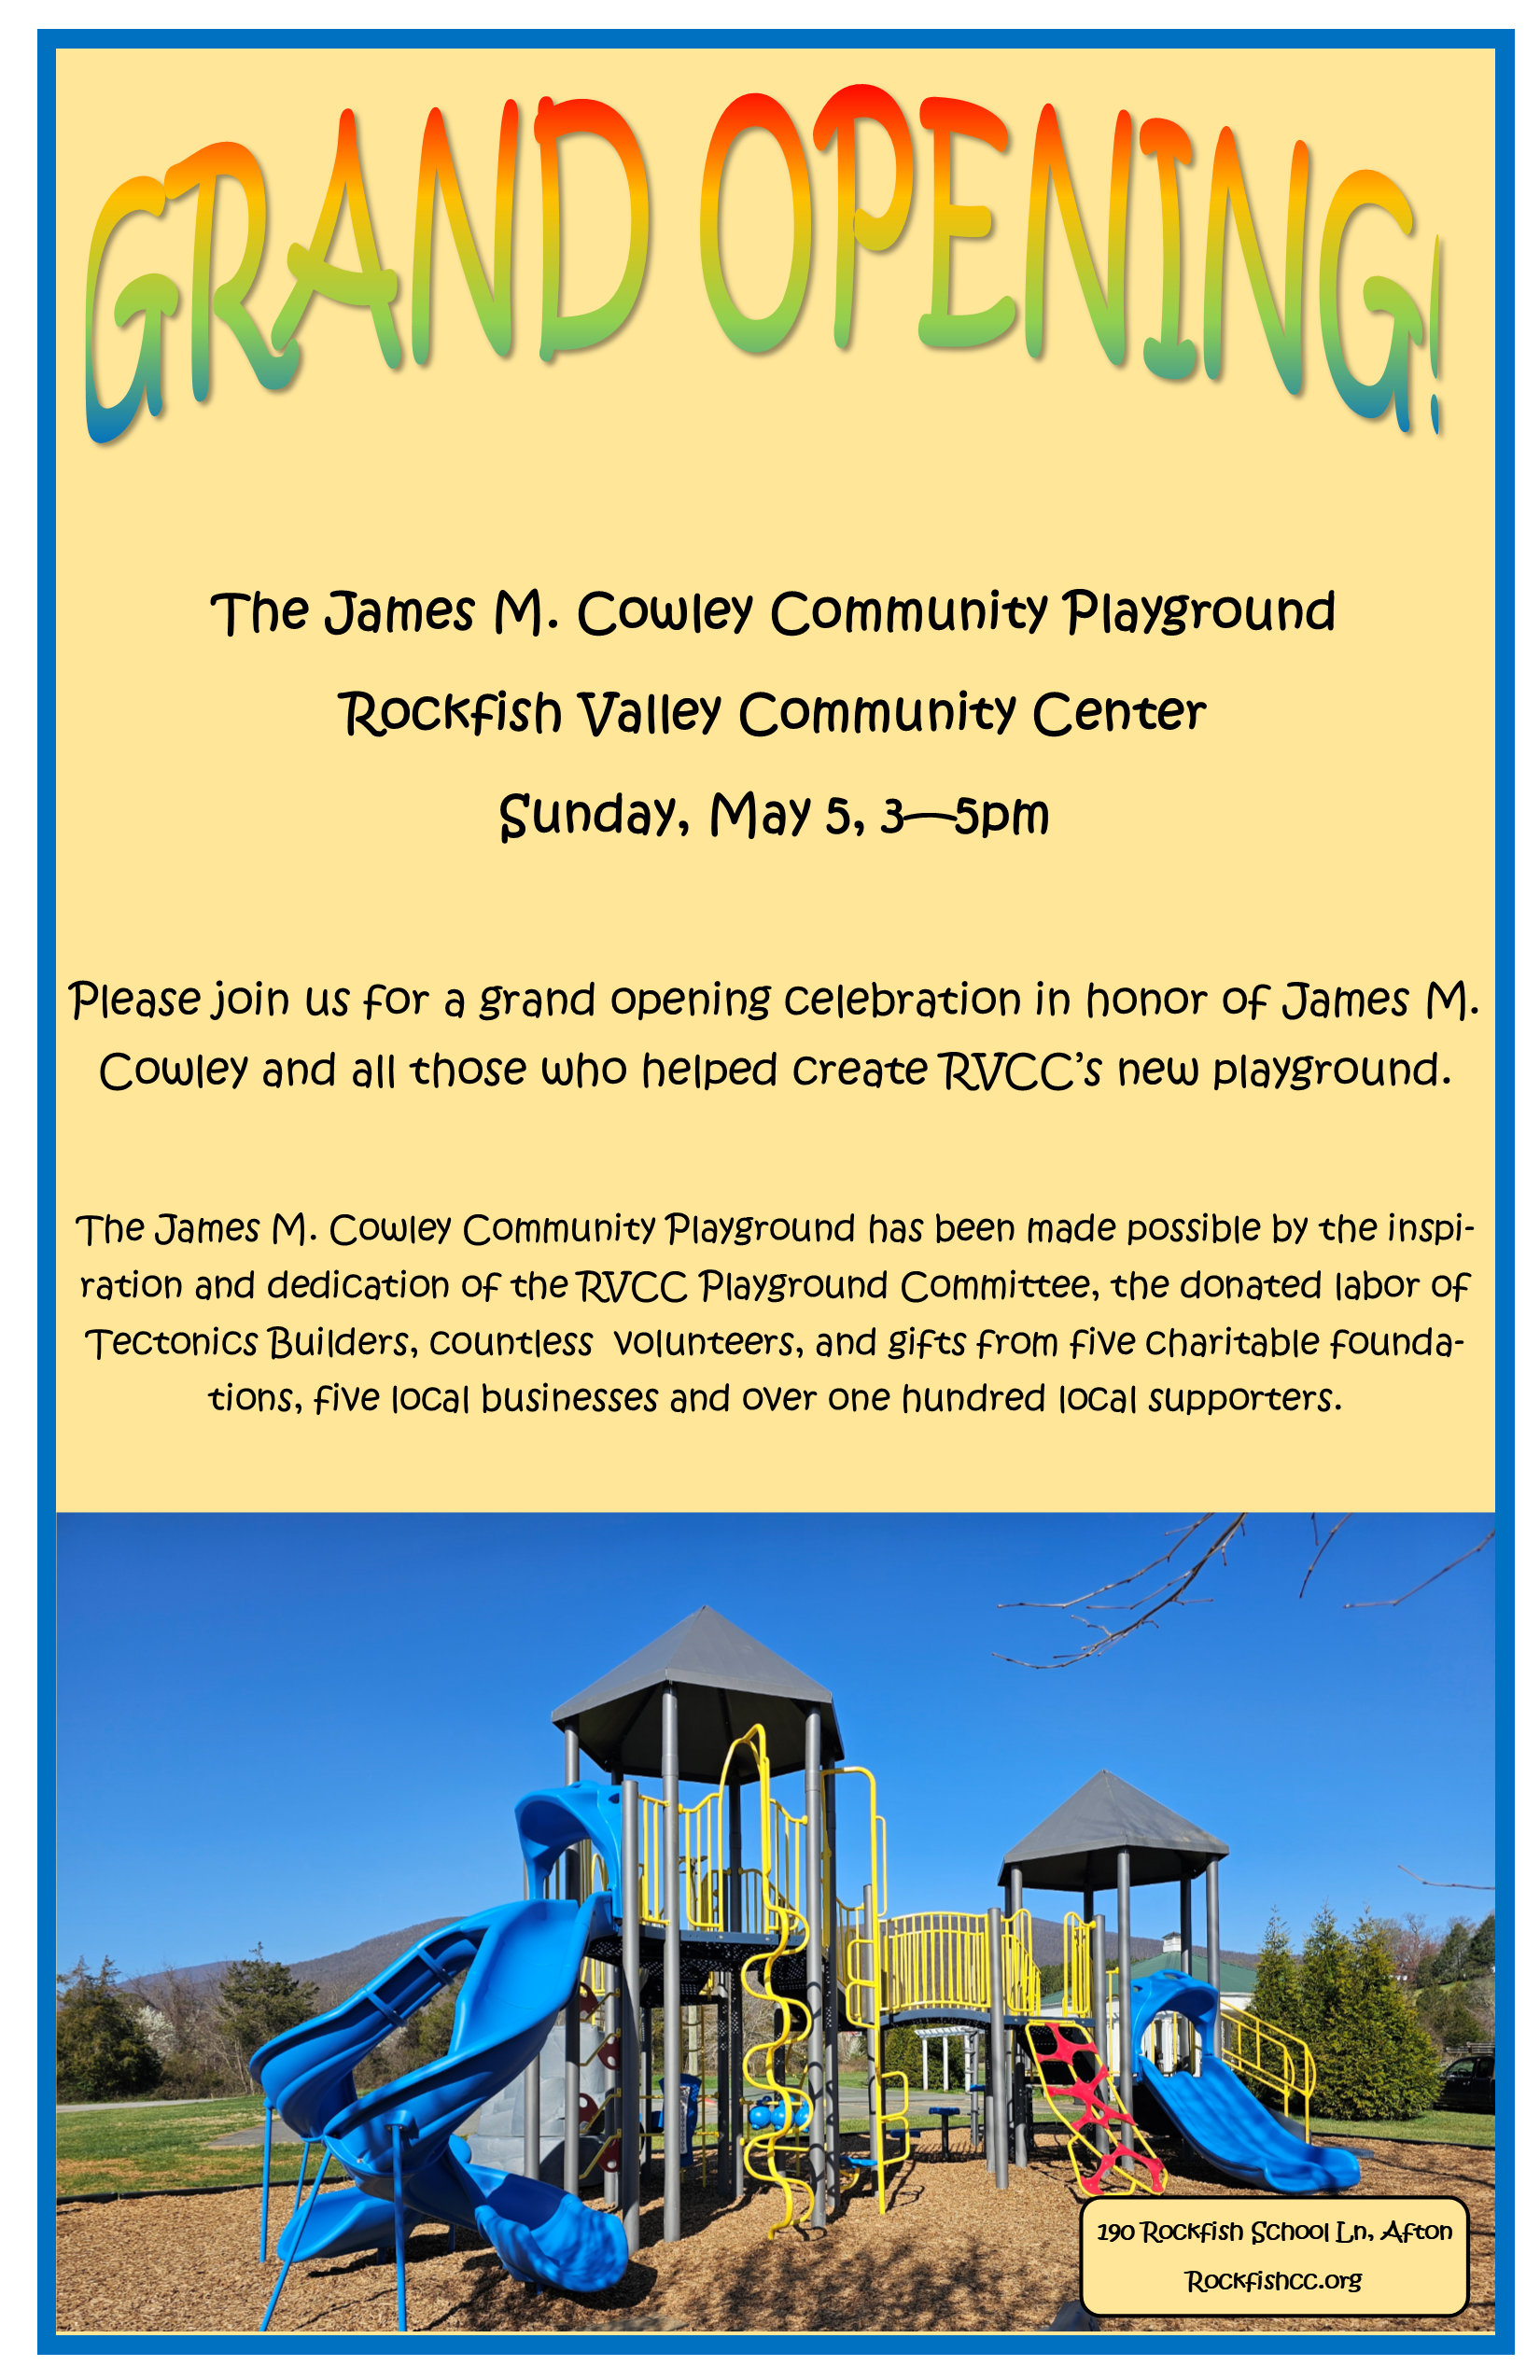 Grand Opening!  The James M. Cowley Community Playground